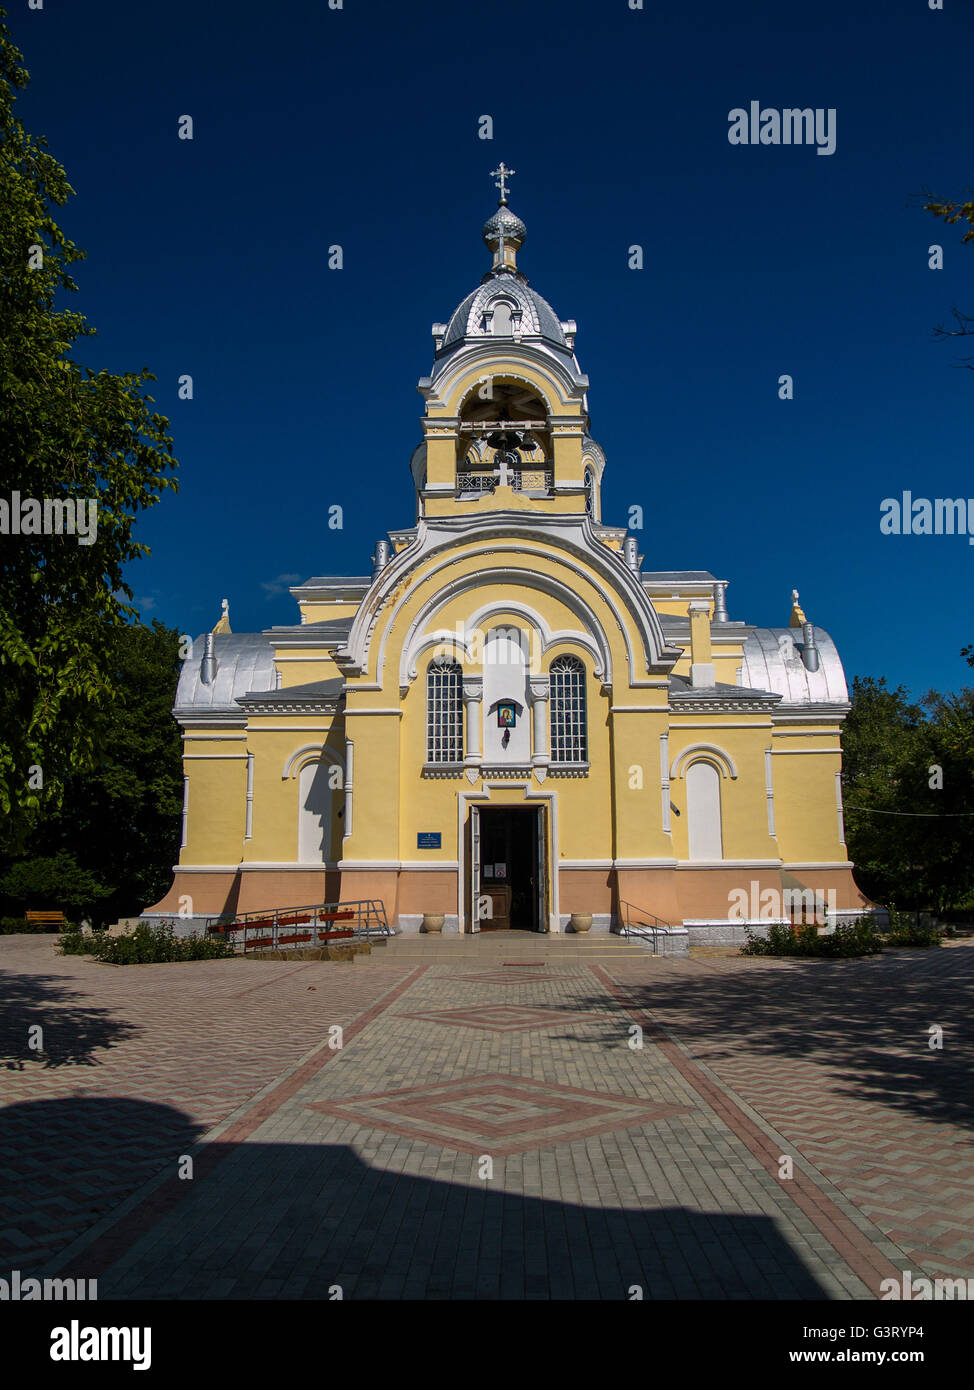 Chapel in the square on a bright sunny summer day Stock Photo